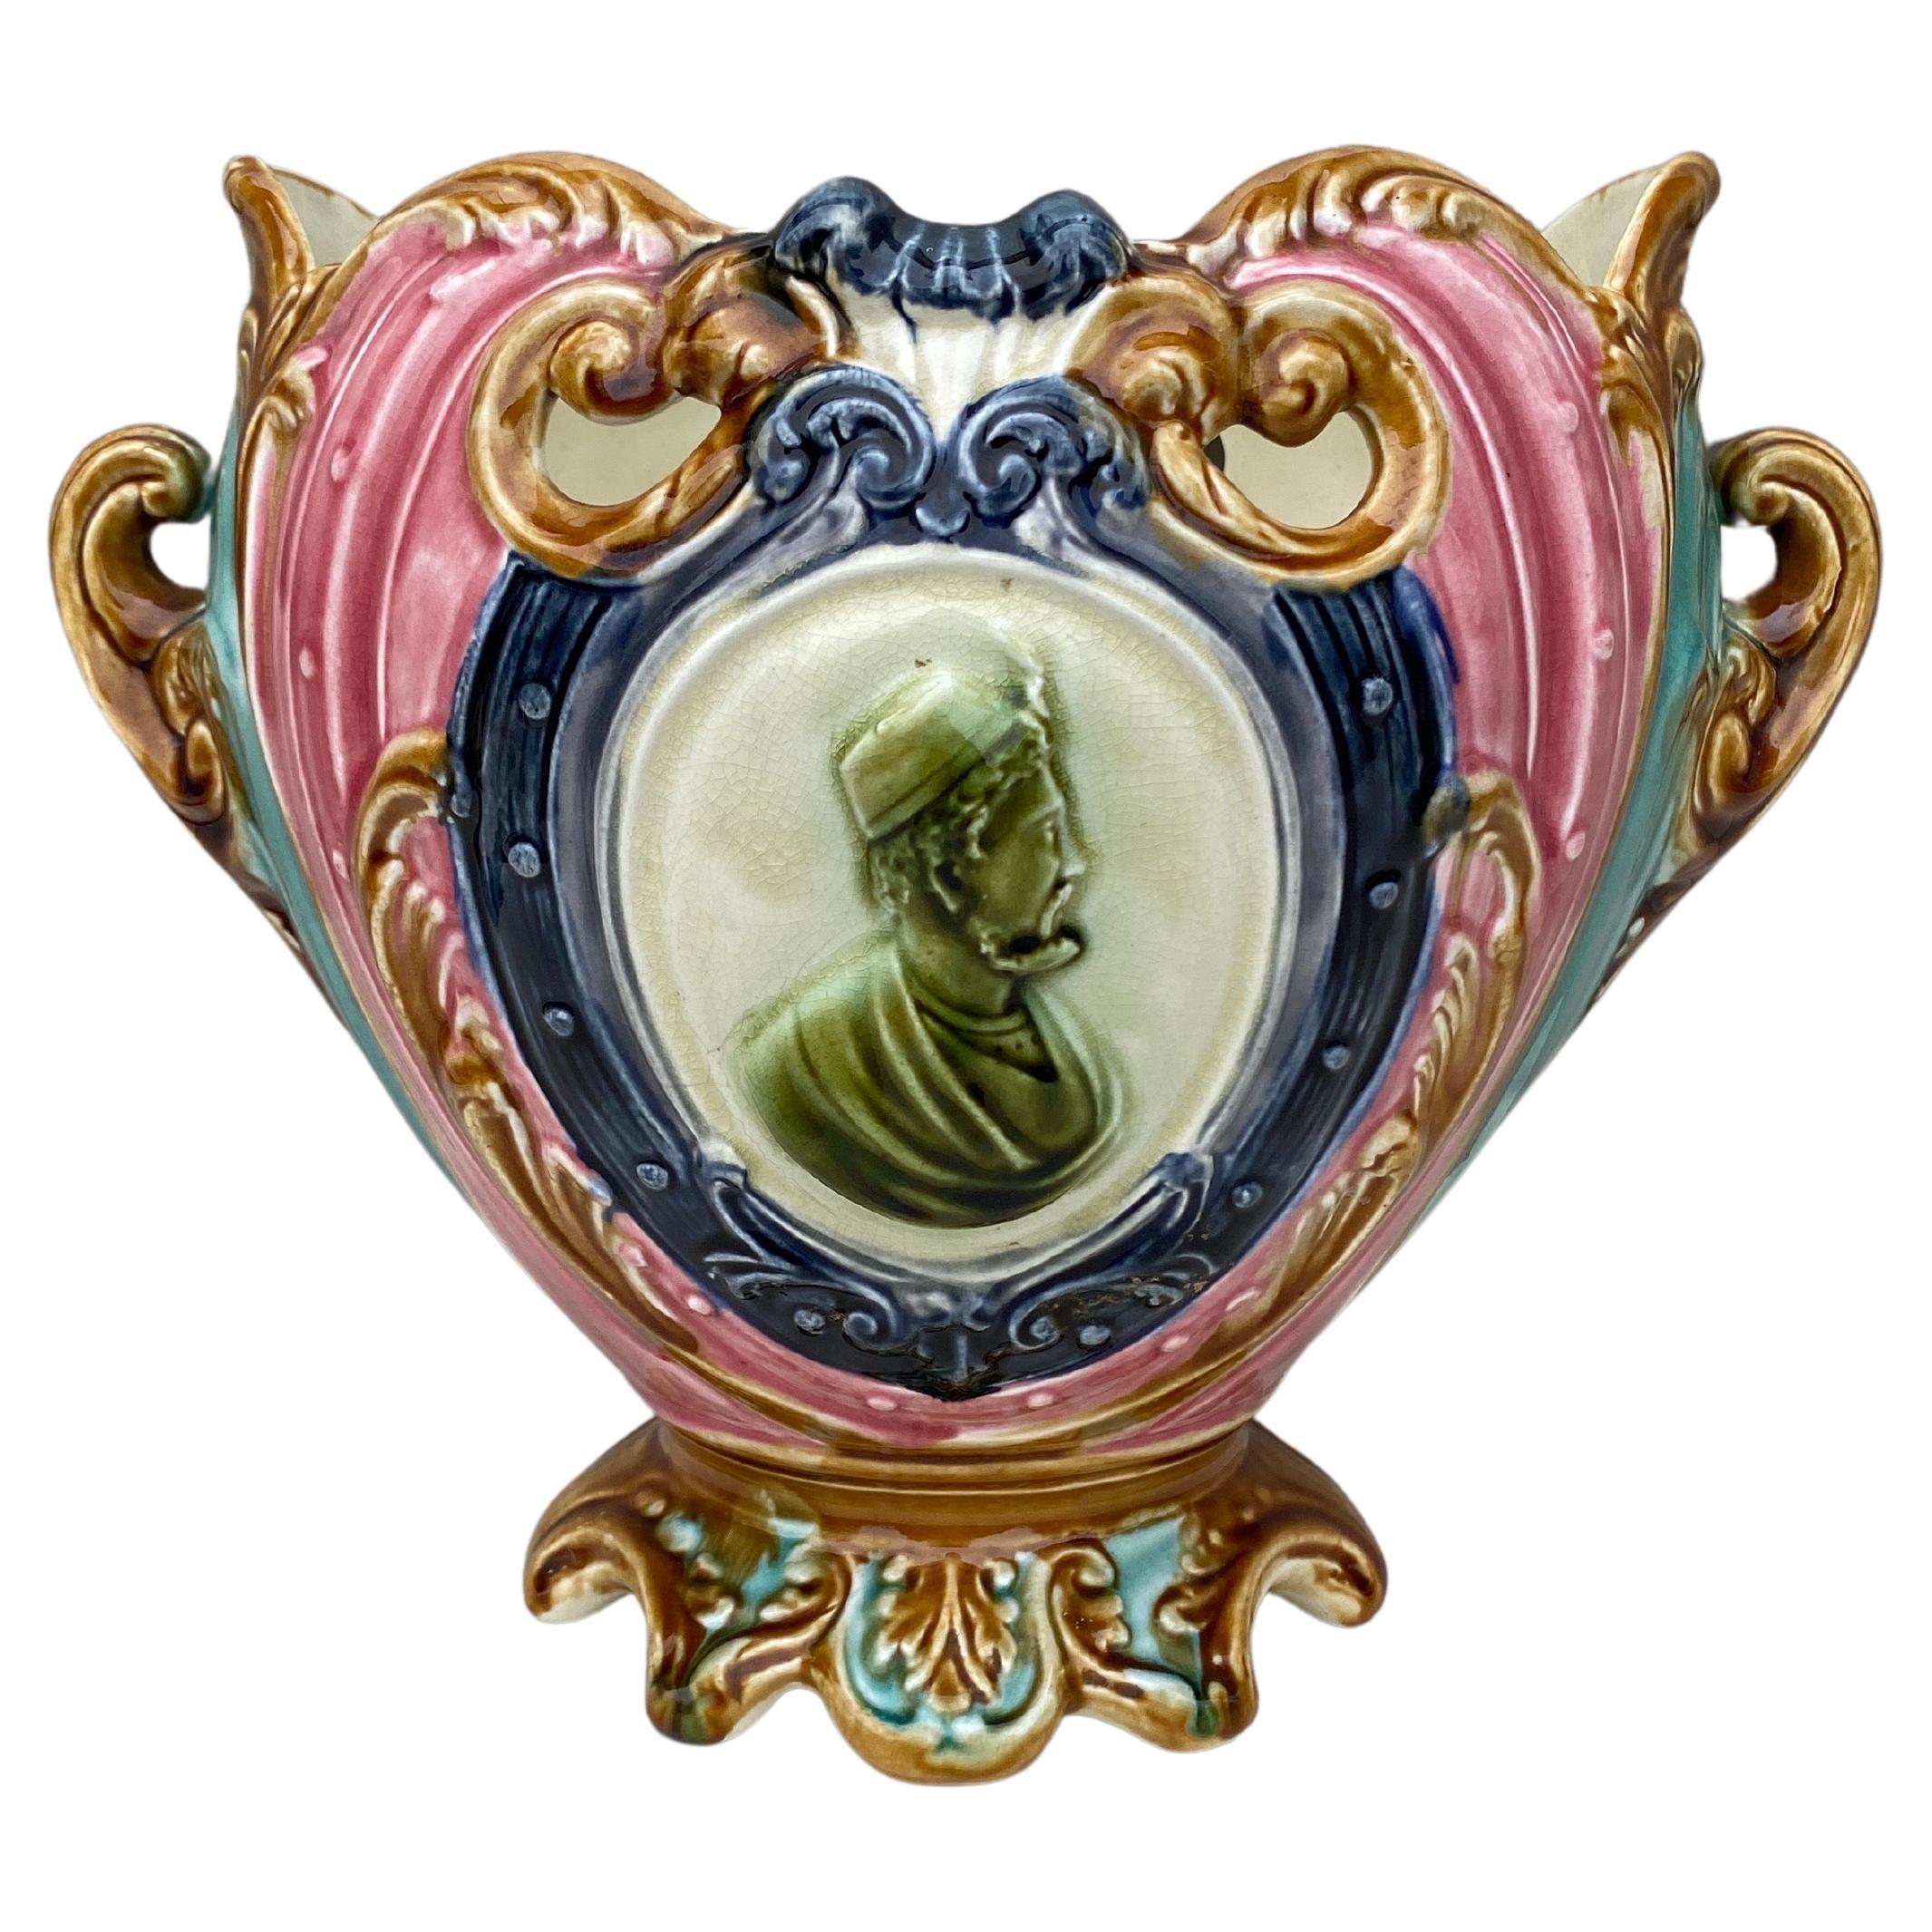 French Majolica jardinière signed Onnaing, circa 1880.
Measures: H / 9.3”, 12” by 9”.